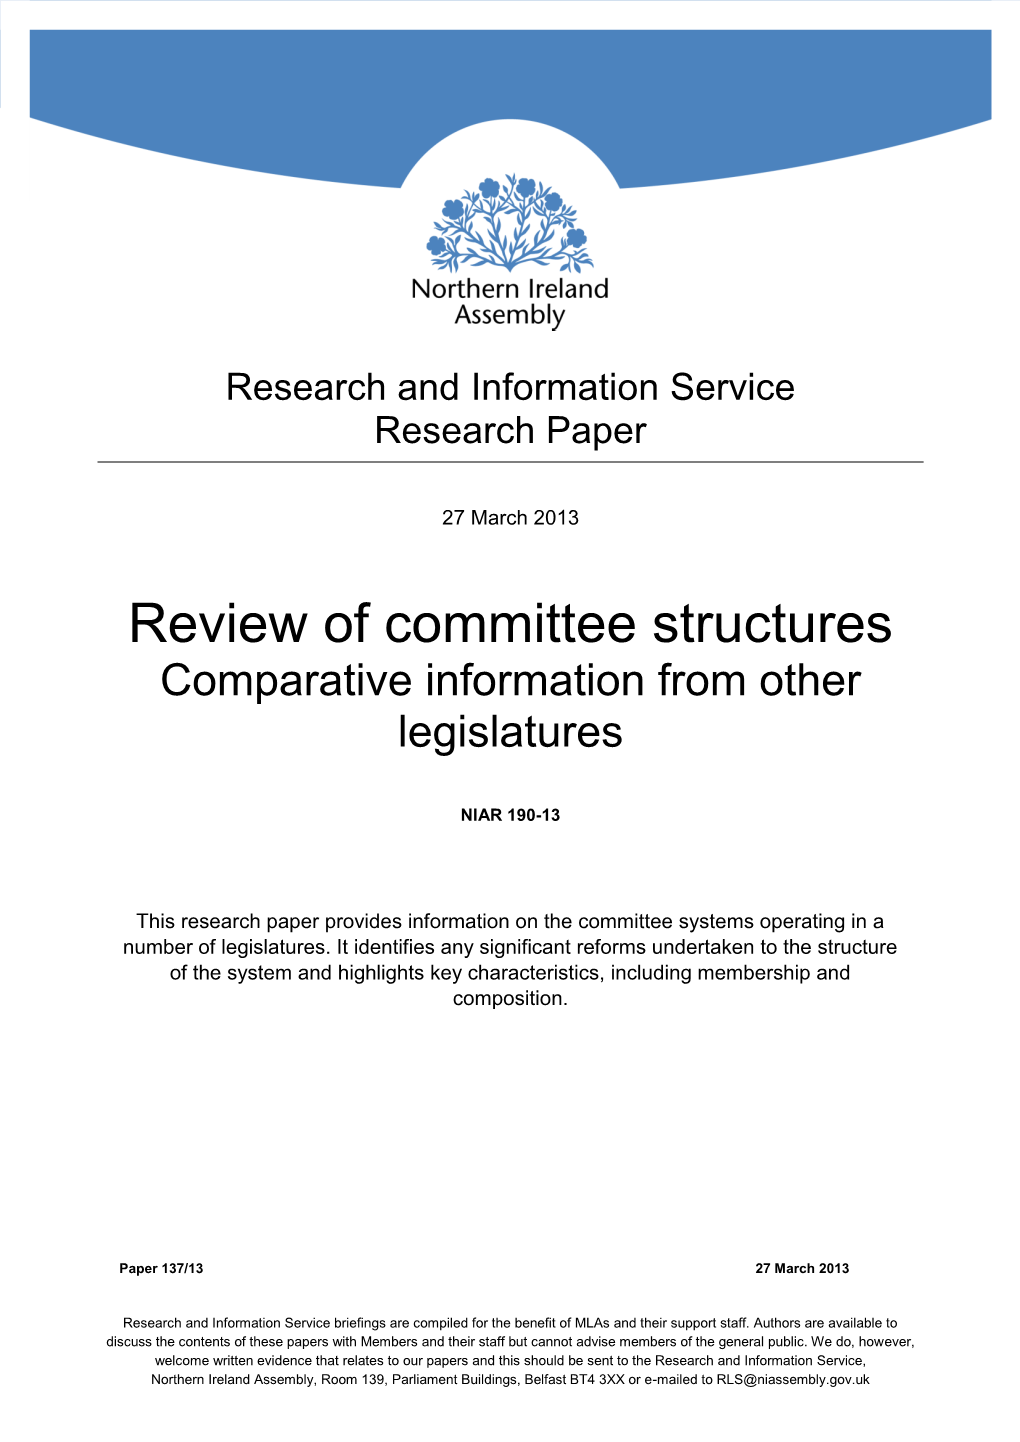 Review of Committee Structures Comparative Information from Other Legislatures